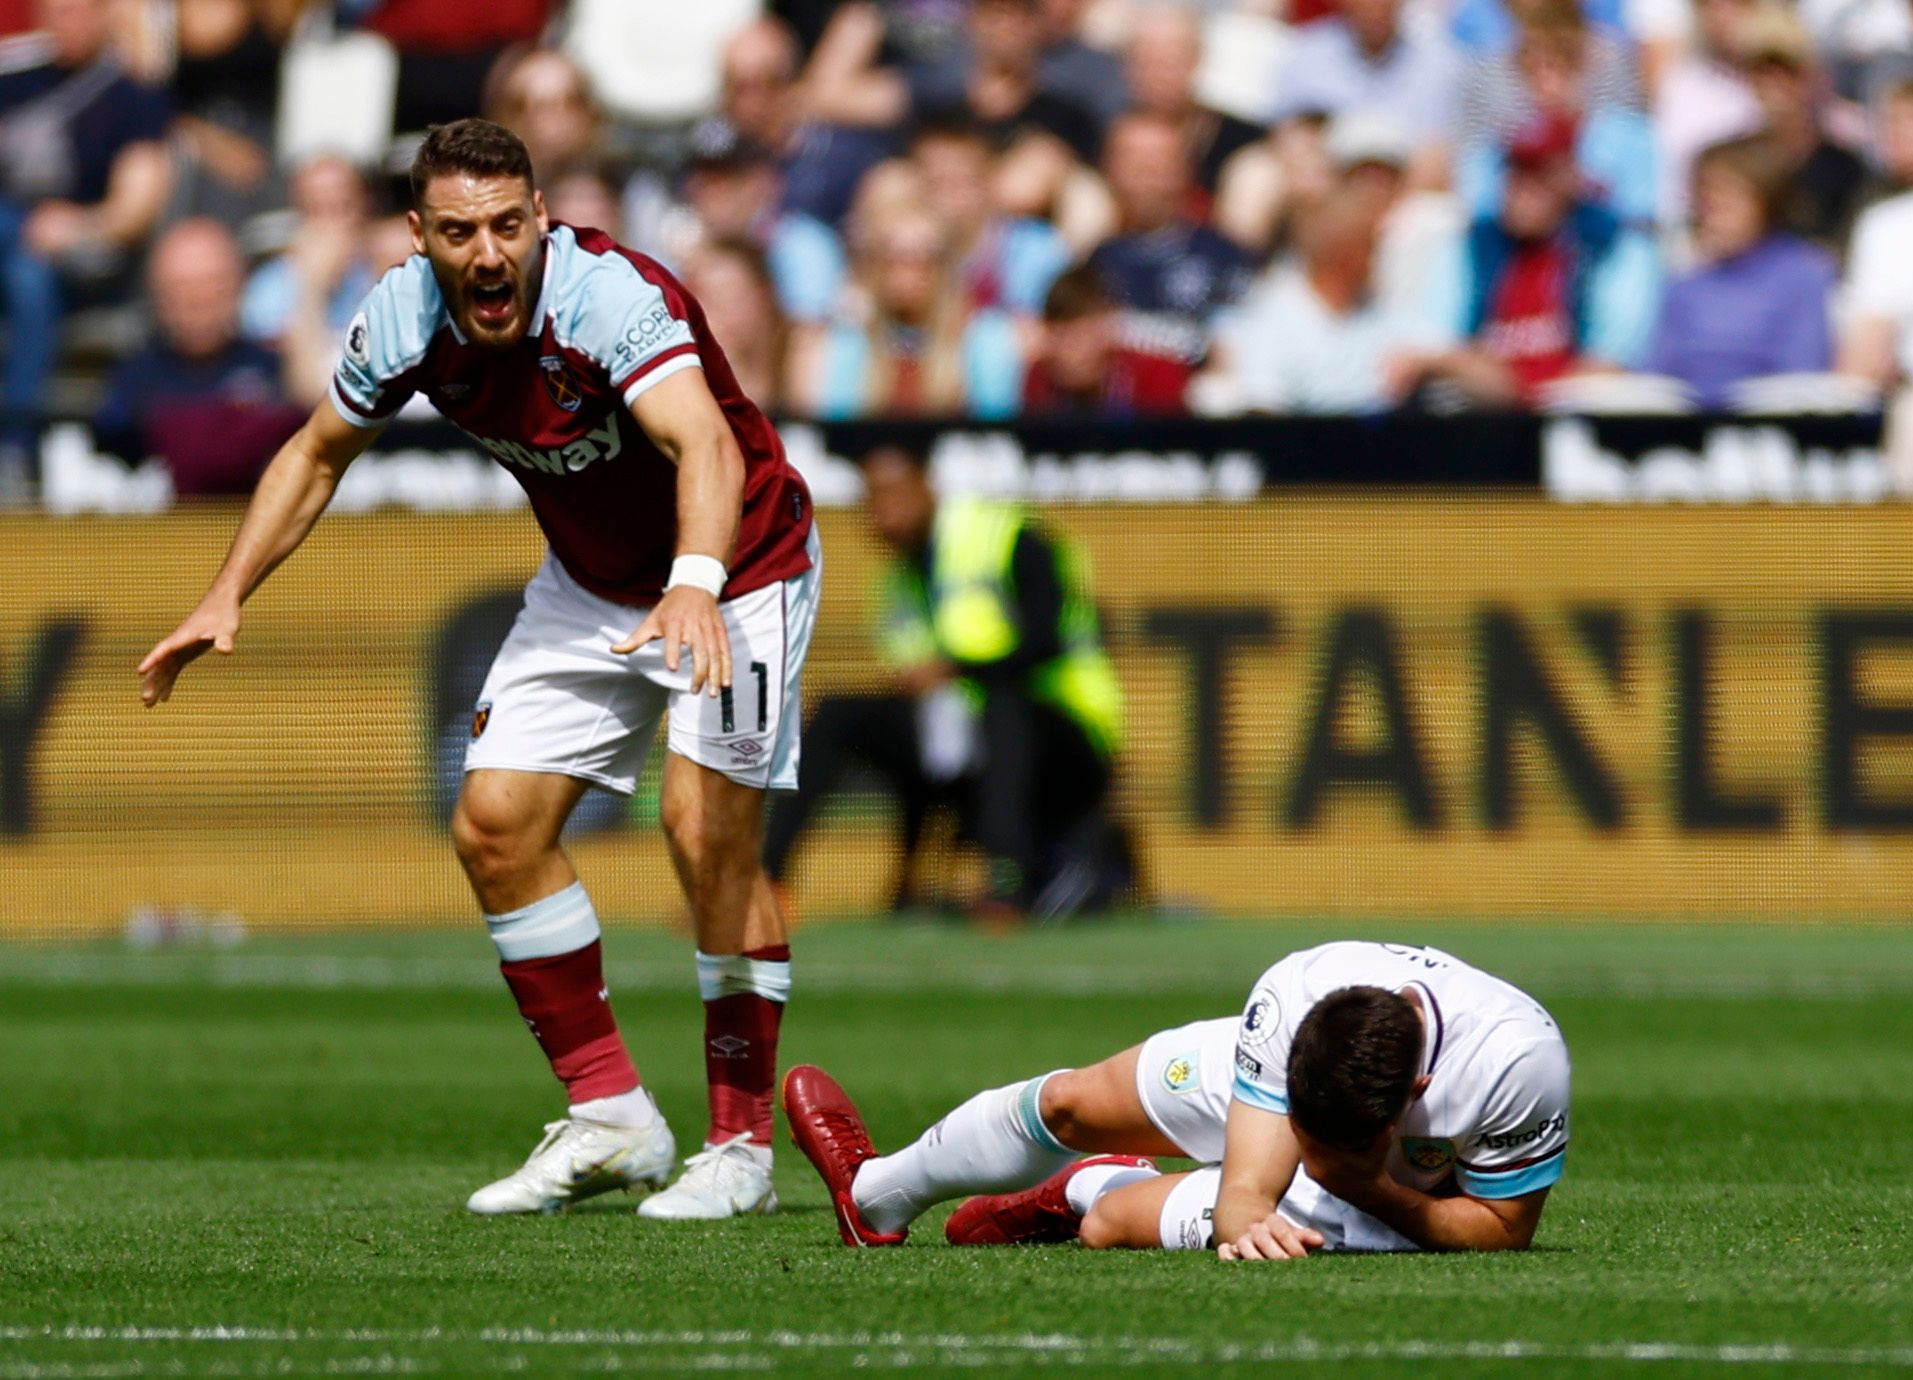 Soccer Football - Premier League - West Ham United v Burnley - London Stadium, London, Britain - April 17, 2022 Burnley's Ashley Westwood reacts after sustaining an injury as West Ham United's Nikola Vlasic also reacts Action Images via Reuters/Andrew Boyers EDITORIAL USE ONLY. No use with unauthorized audio, video, data, fixture lists, club/league logos or 'live' services. Online in-match use limited to 75 images, no video emulation. No use in betting, games or single club /league/player public